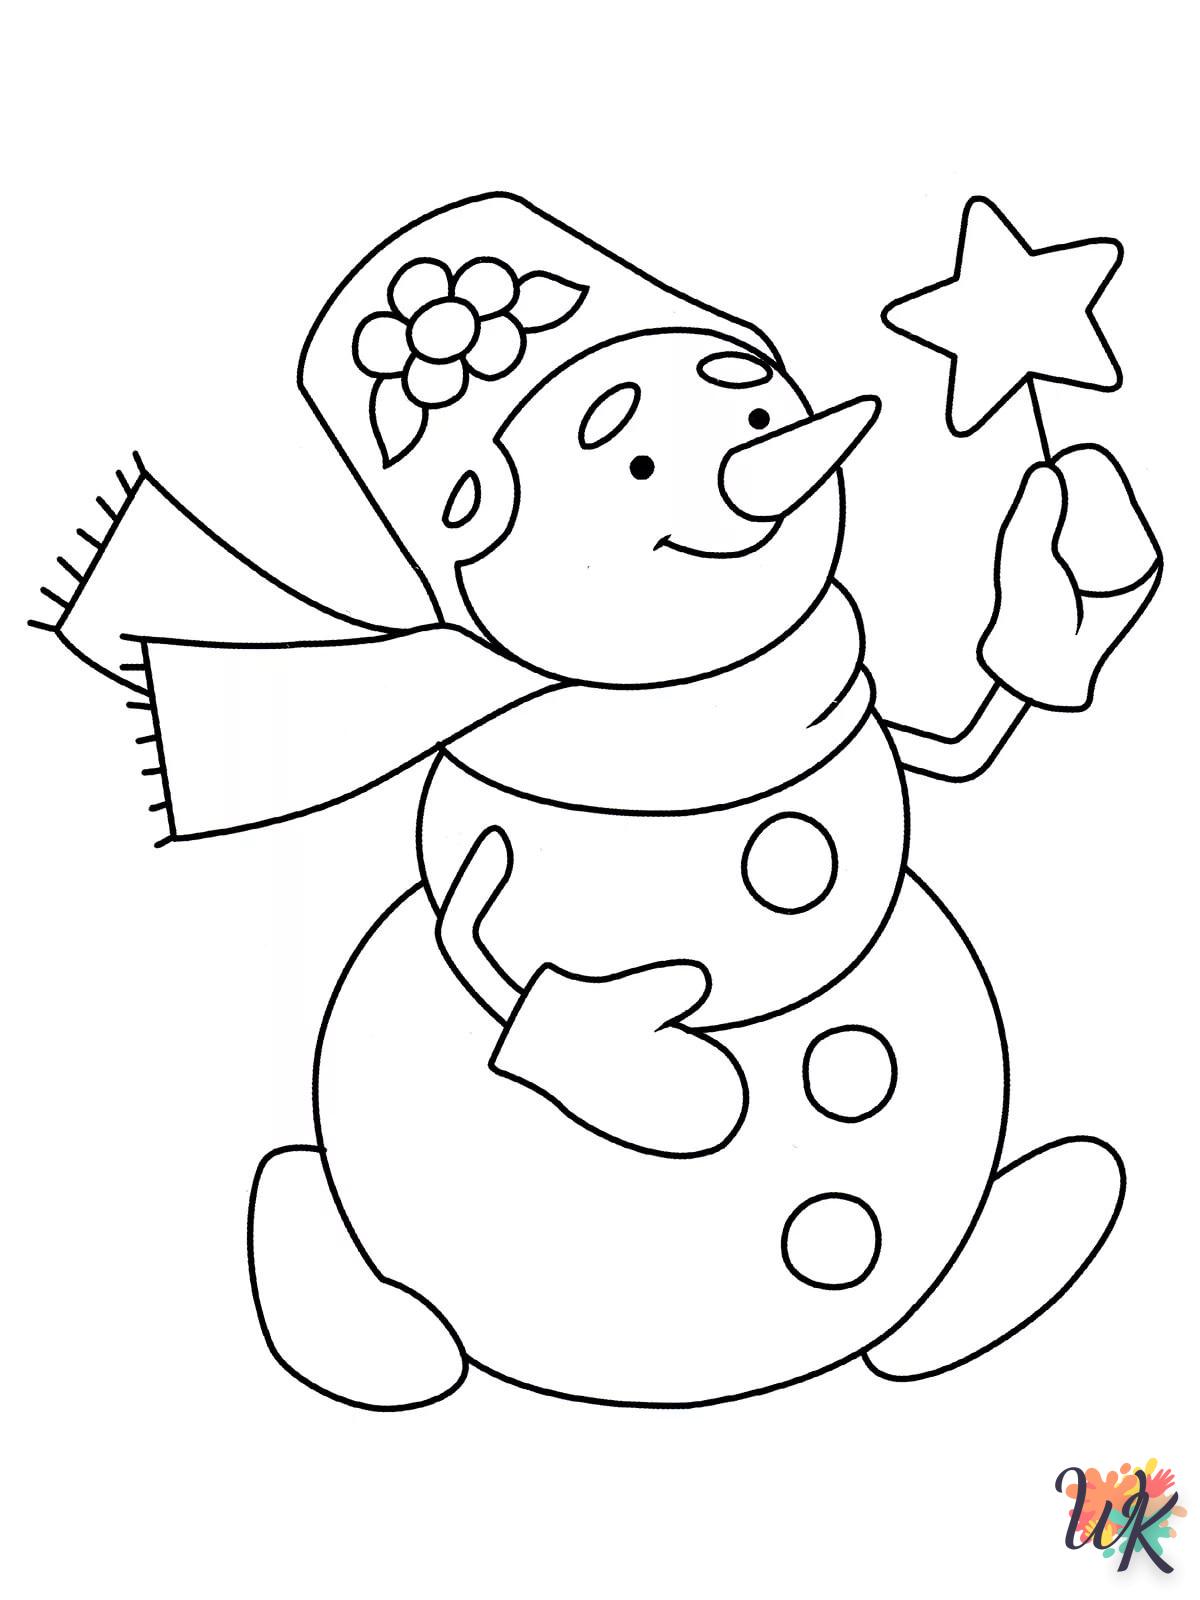 Snowman coloring baby animals to print free